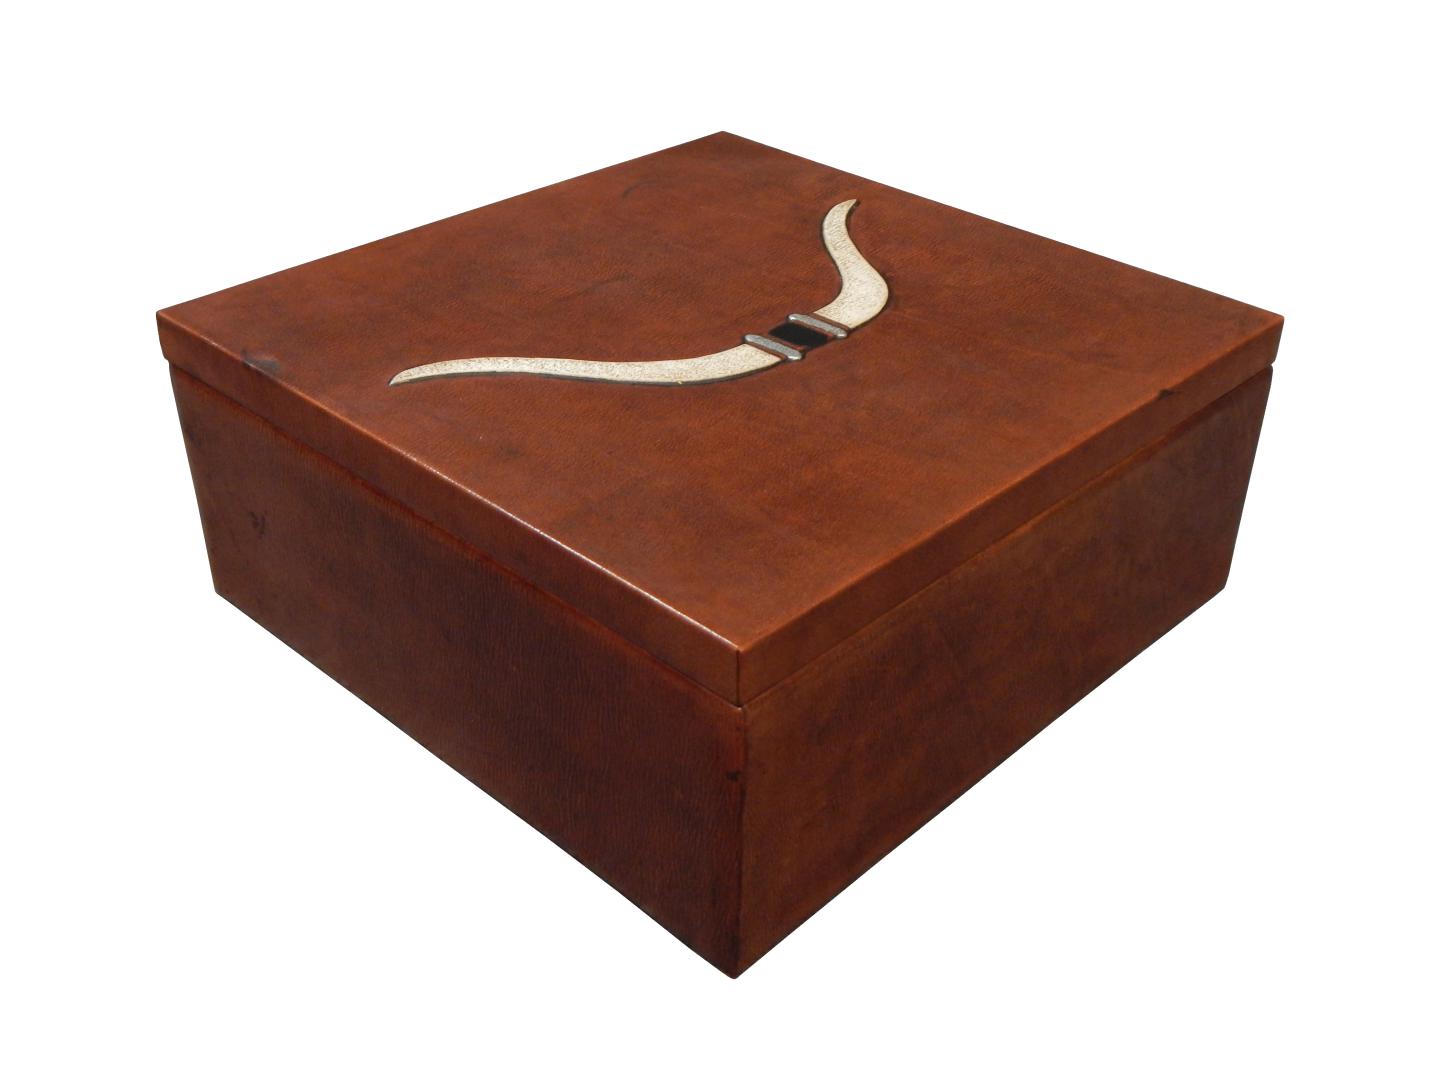 leather box with an antler bull horns design on high relief on the top